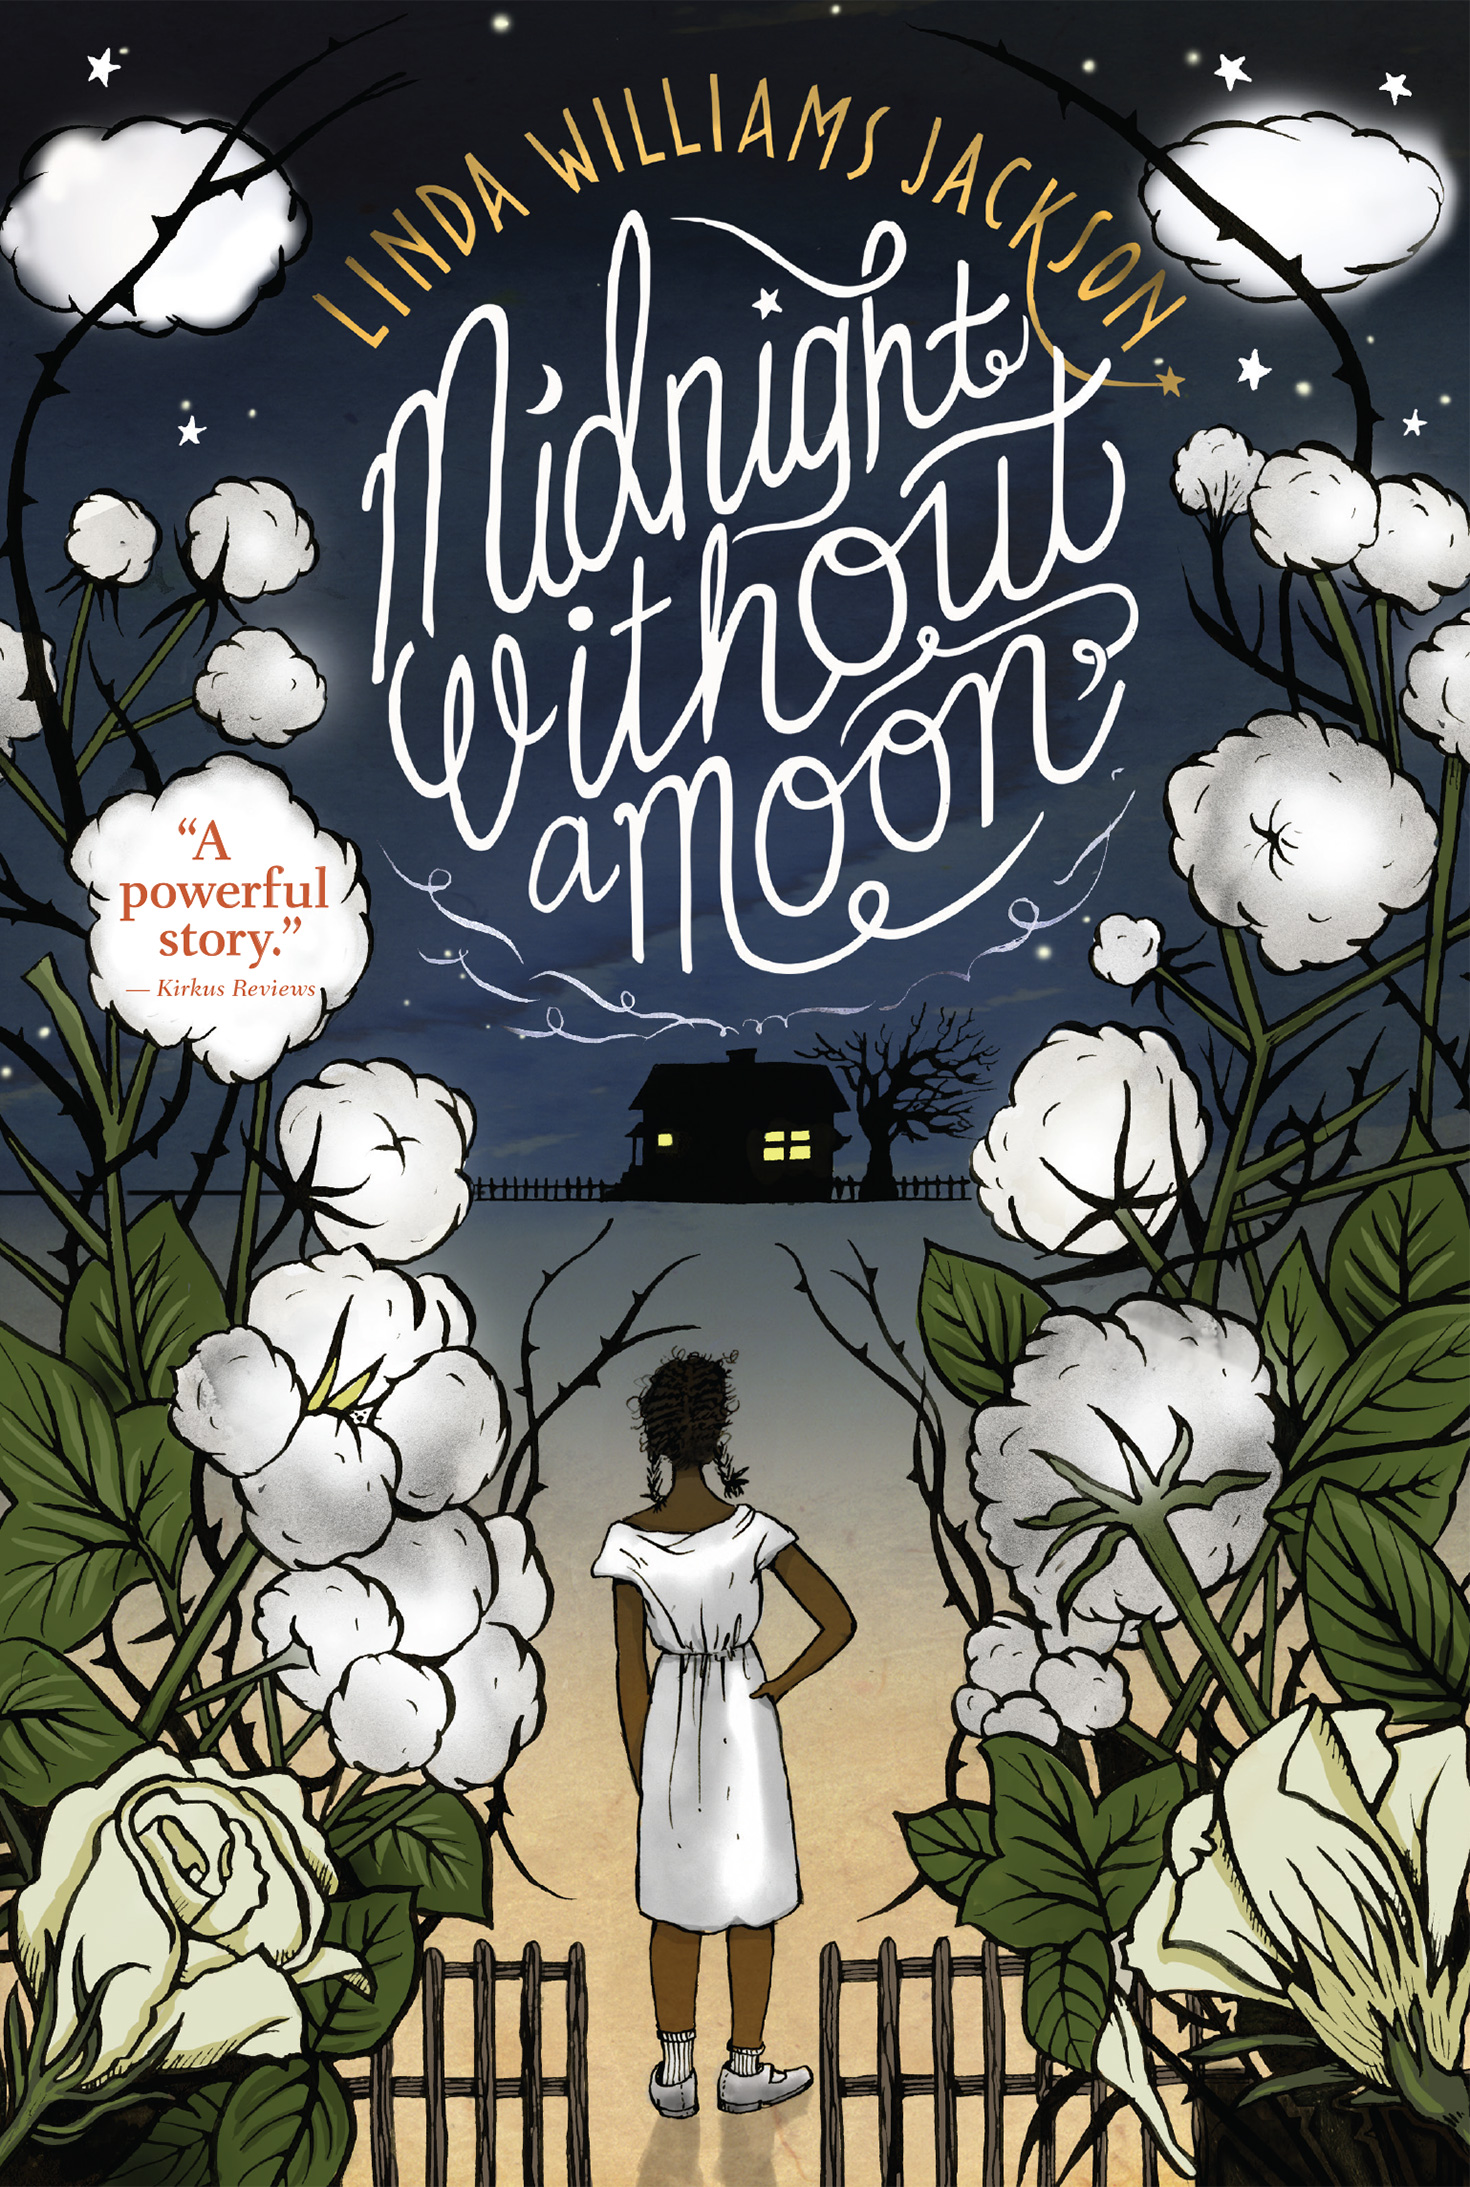 Cover of Midnight Without A Moon depicting a black girl in a white dress facing away from the viewer, surrounded by white flowers and looking towards the silhouette of a house in the background with the lights in the windows illuminated.